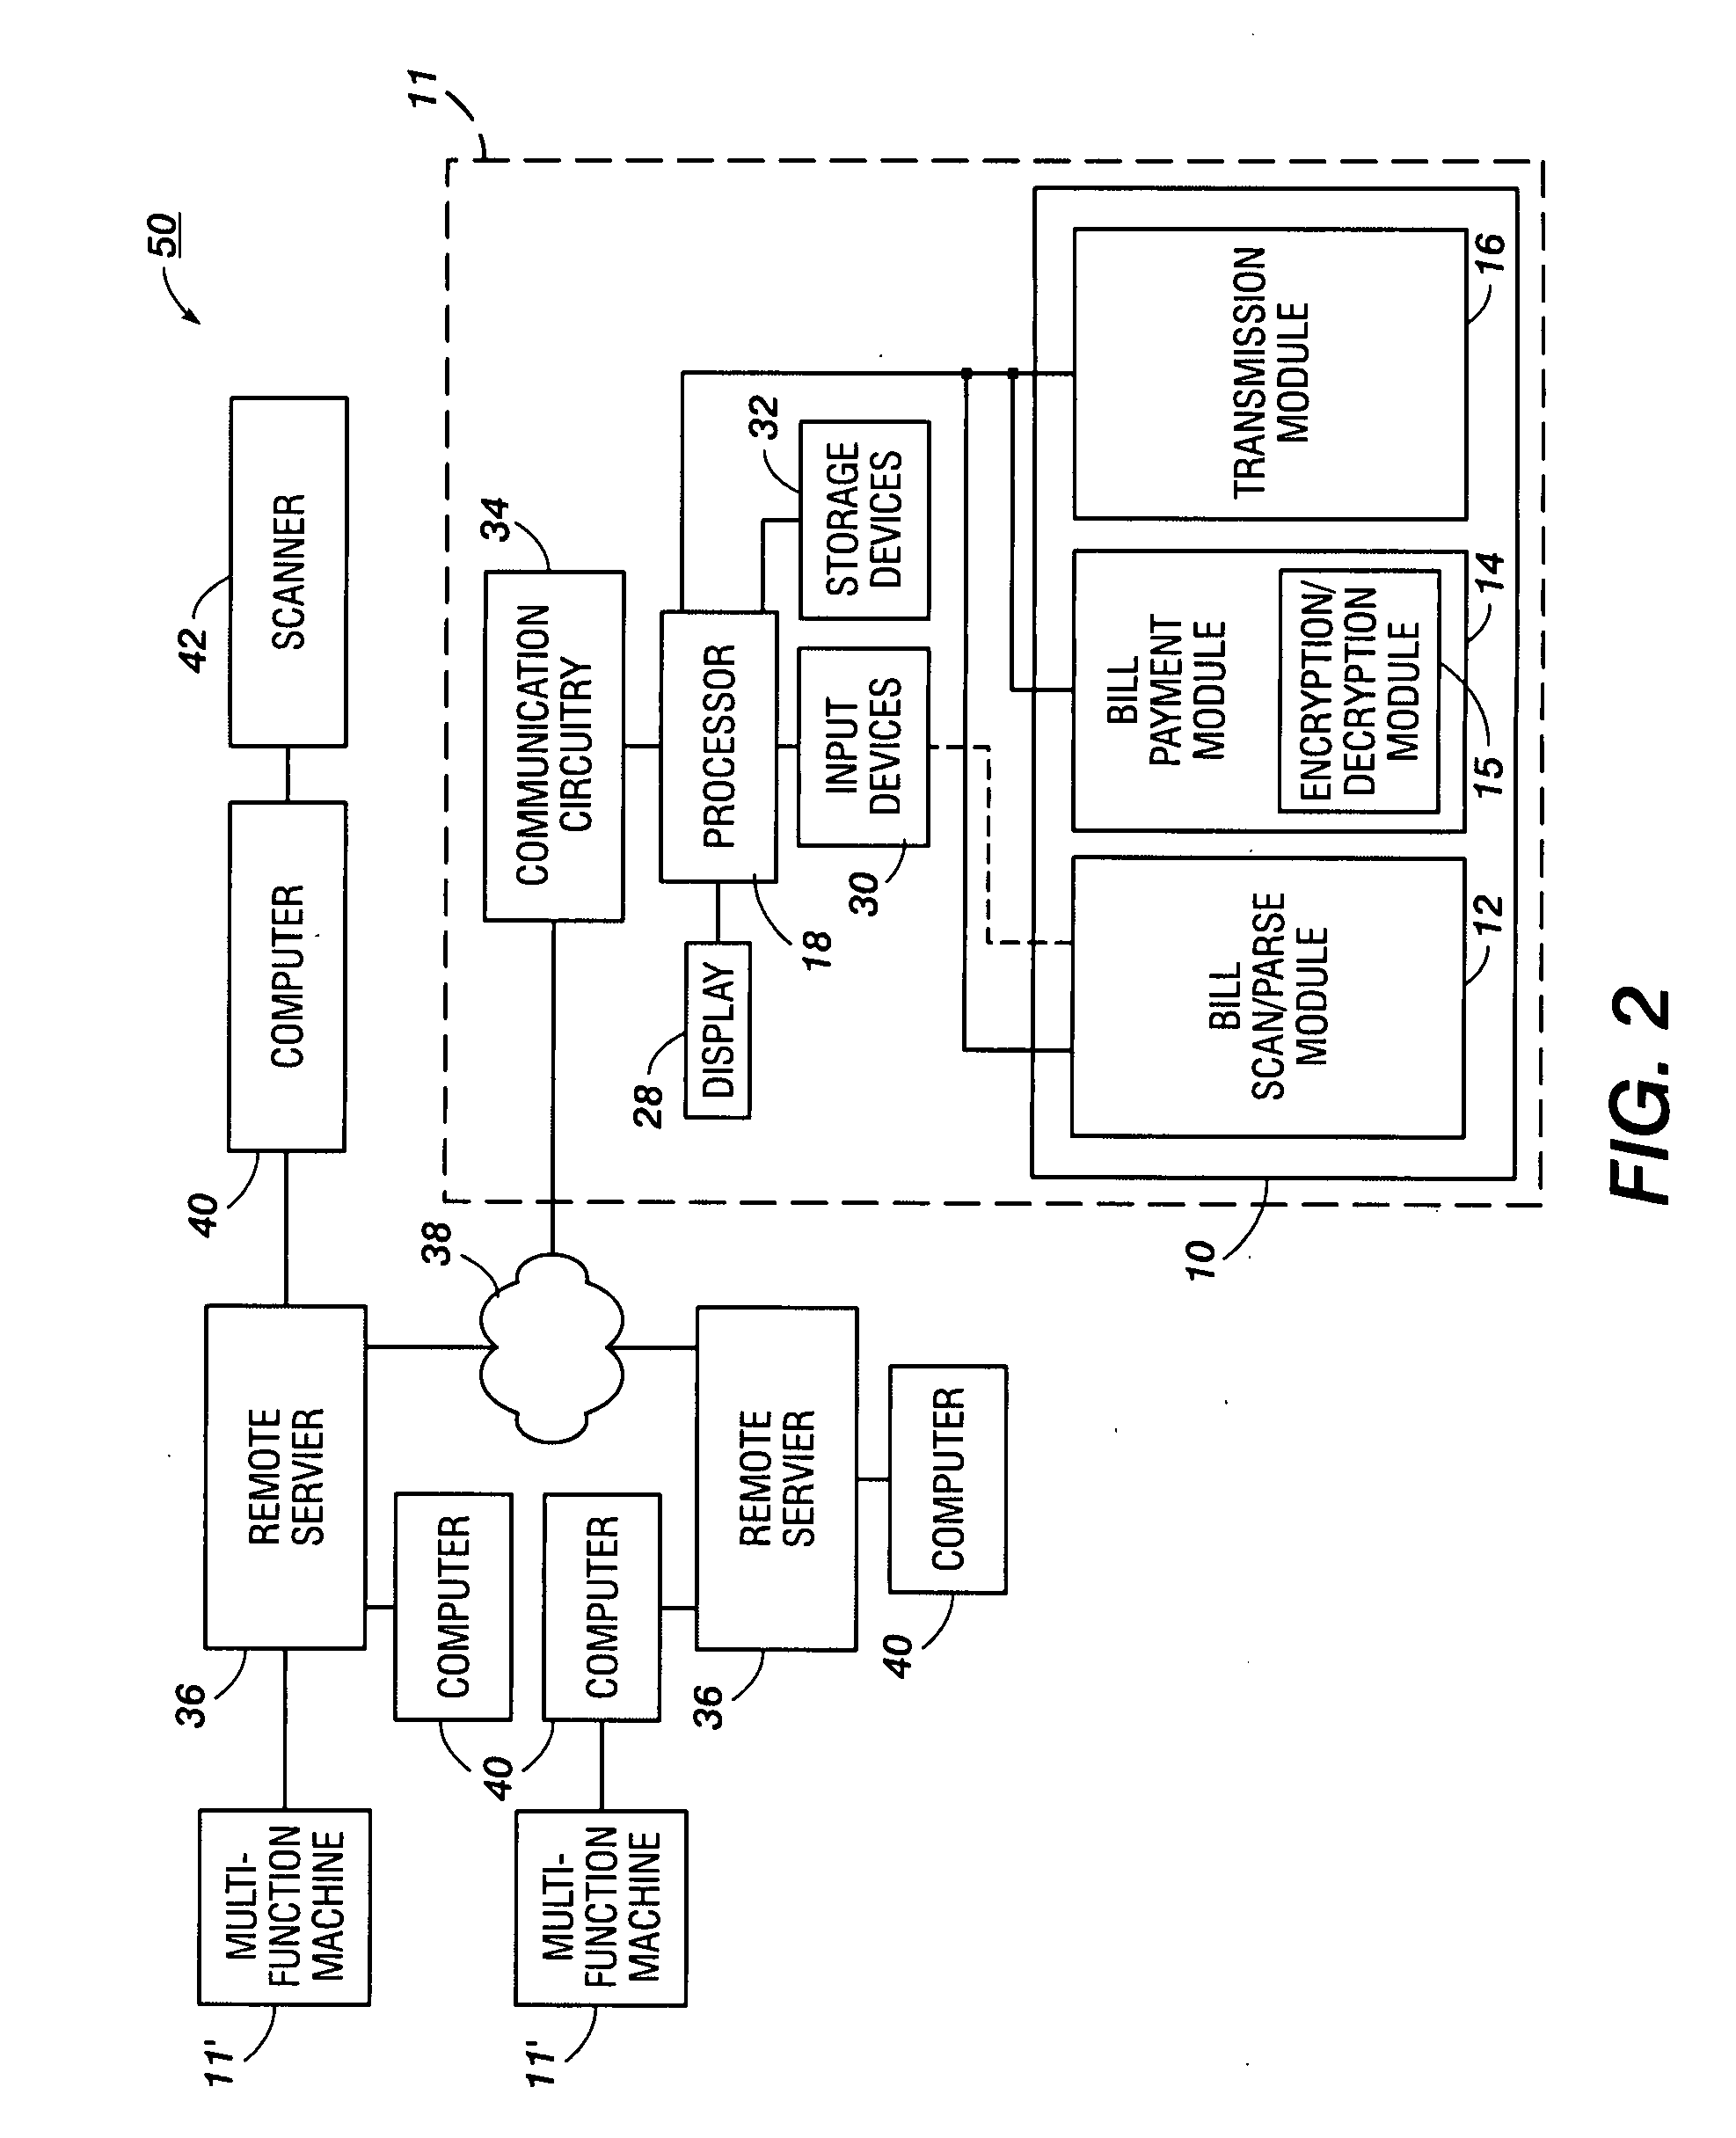 Optical character reading machine having bill payment capability